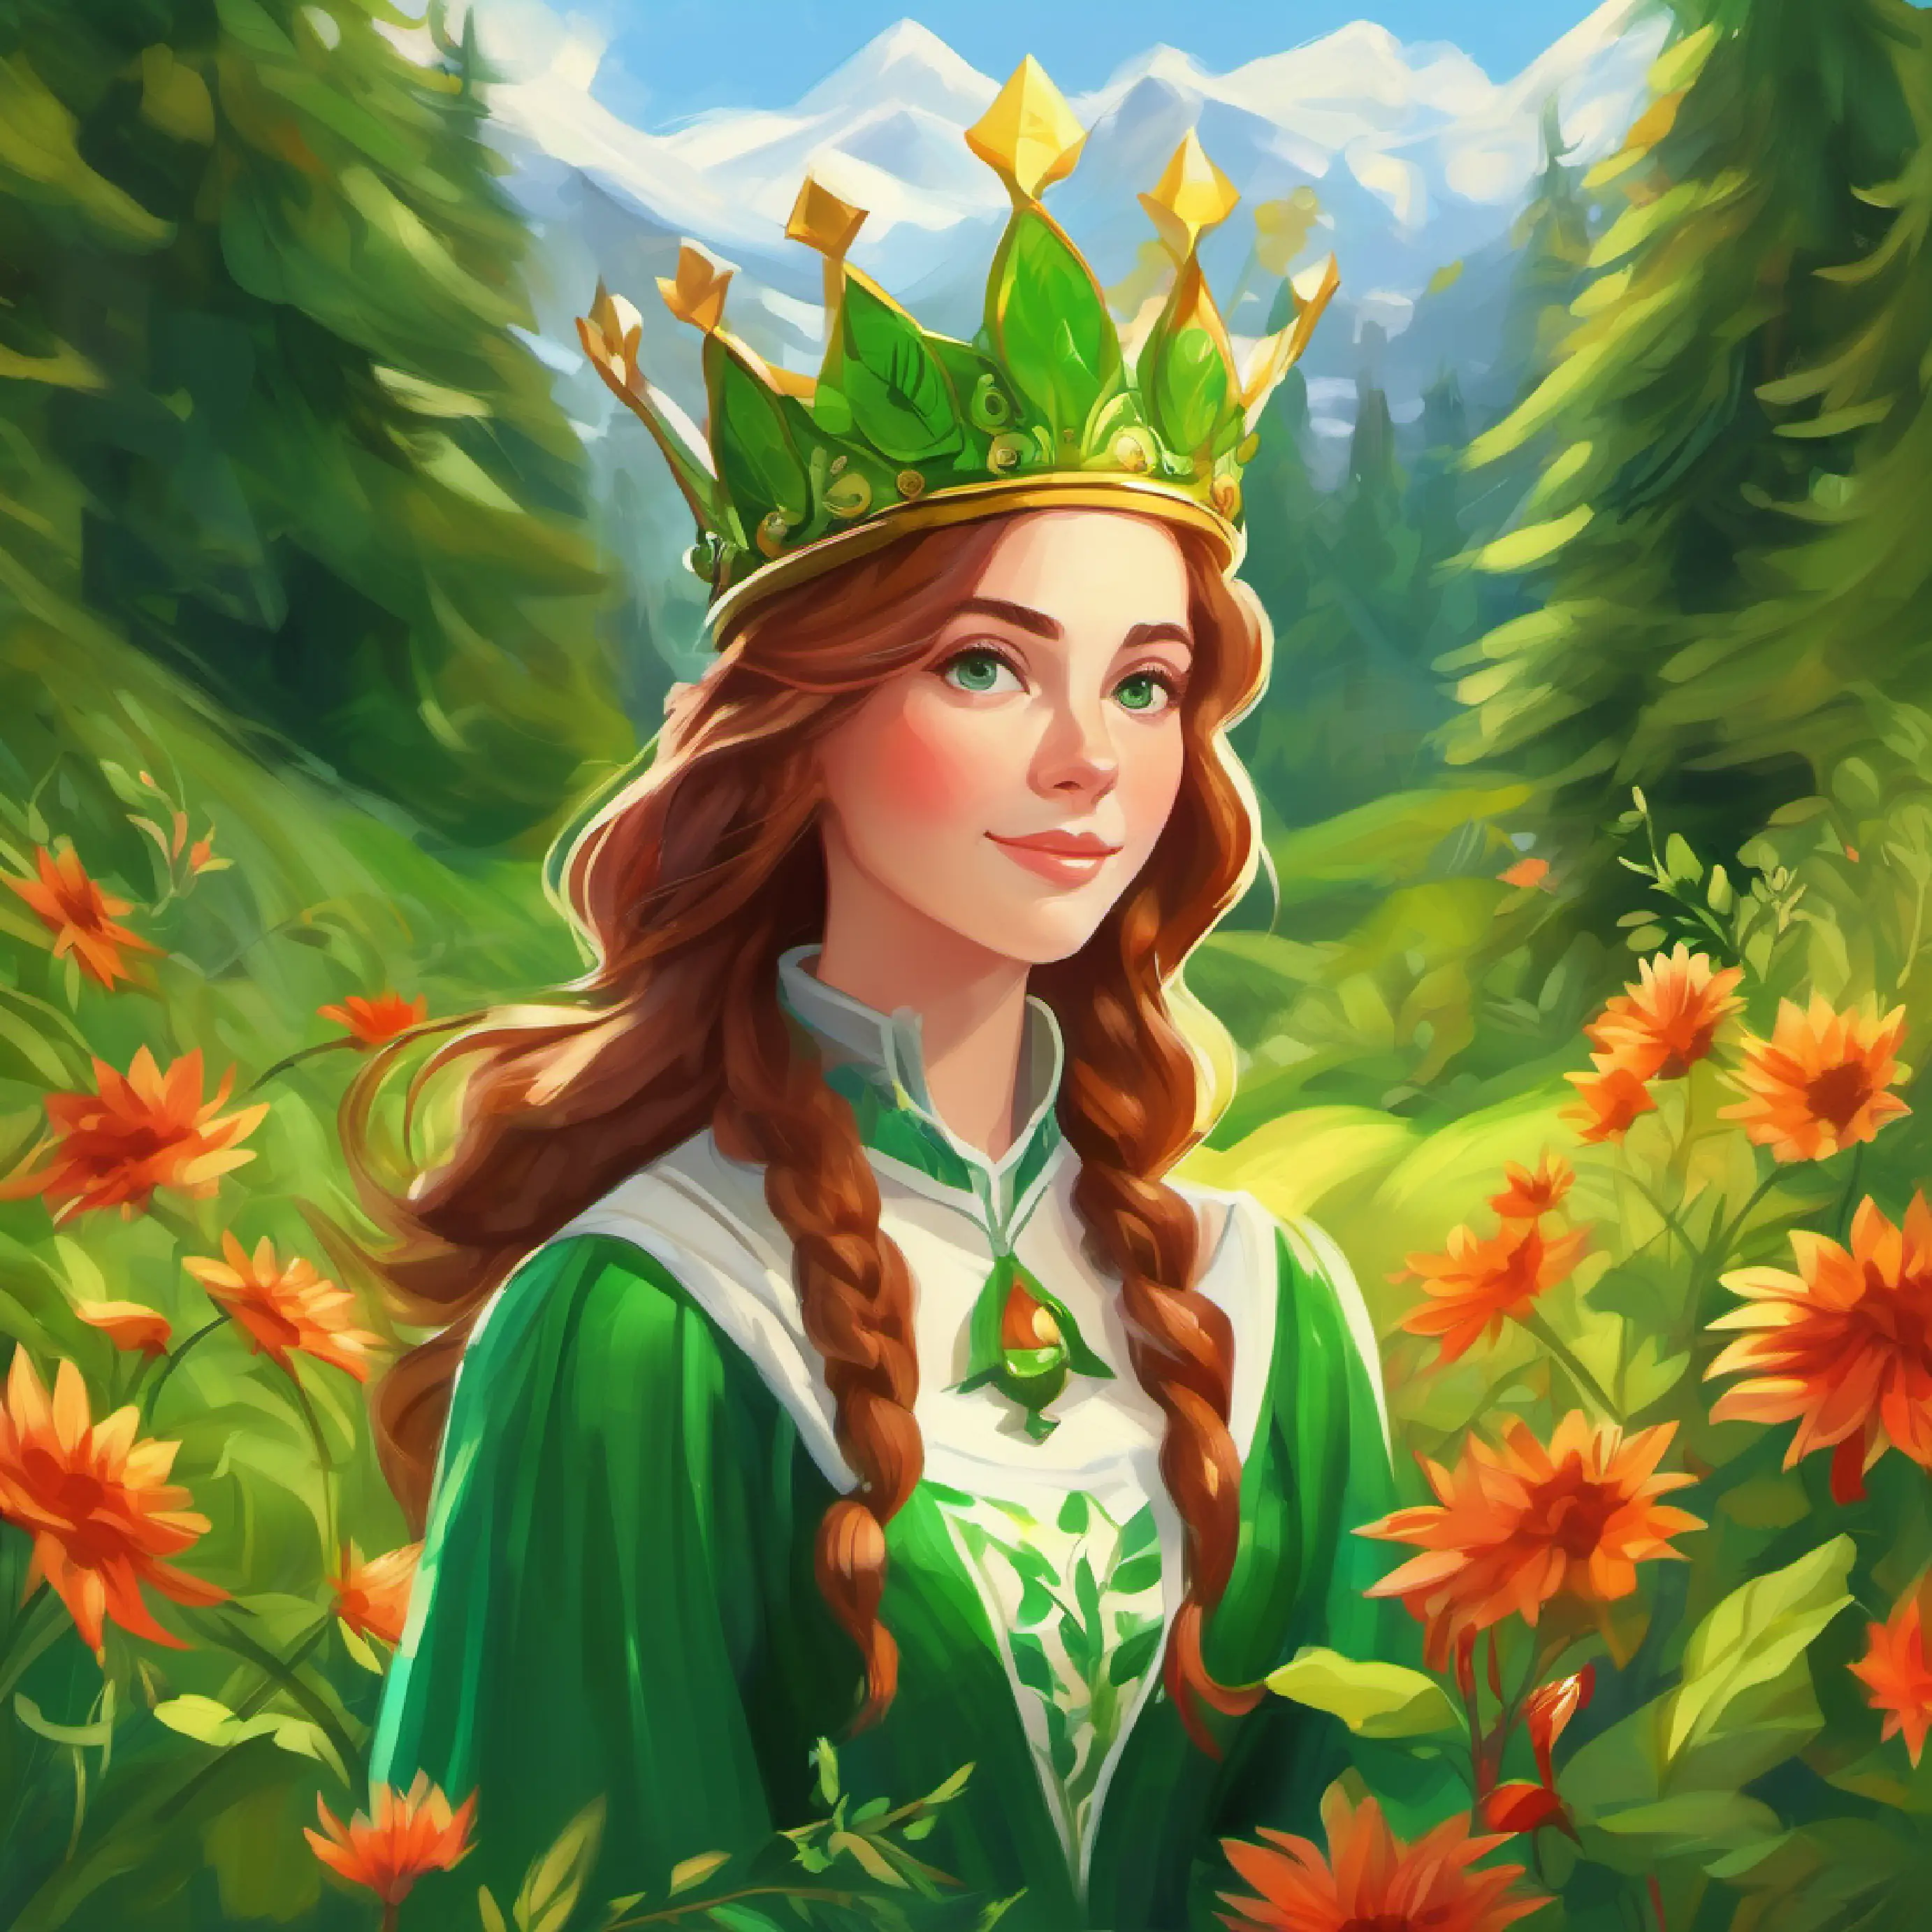 Brave young girl with flowing chestnut hair and bright green eyes is named Queen of Breezy Meadows, symbolized by a special crown.